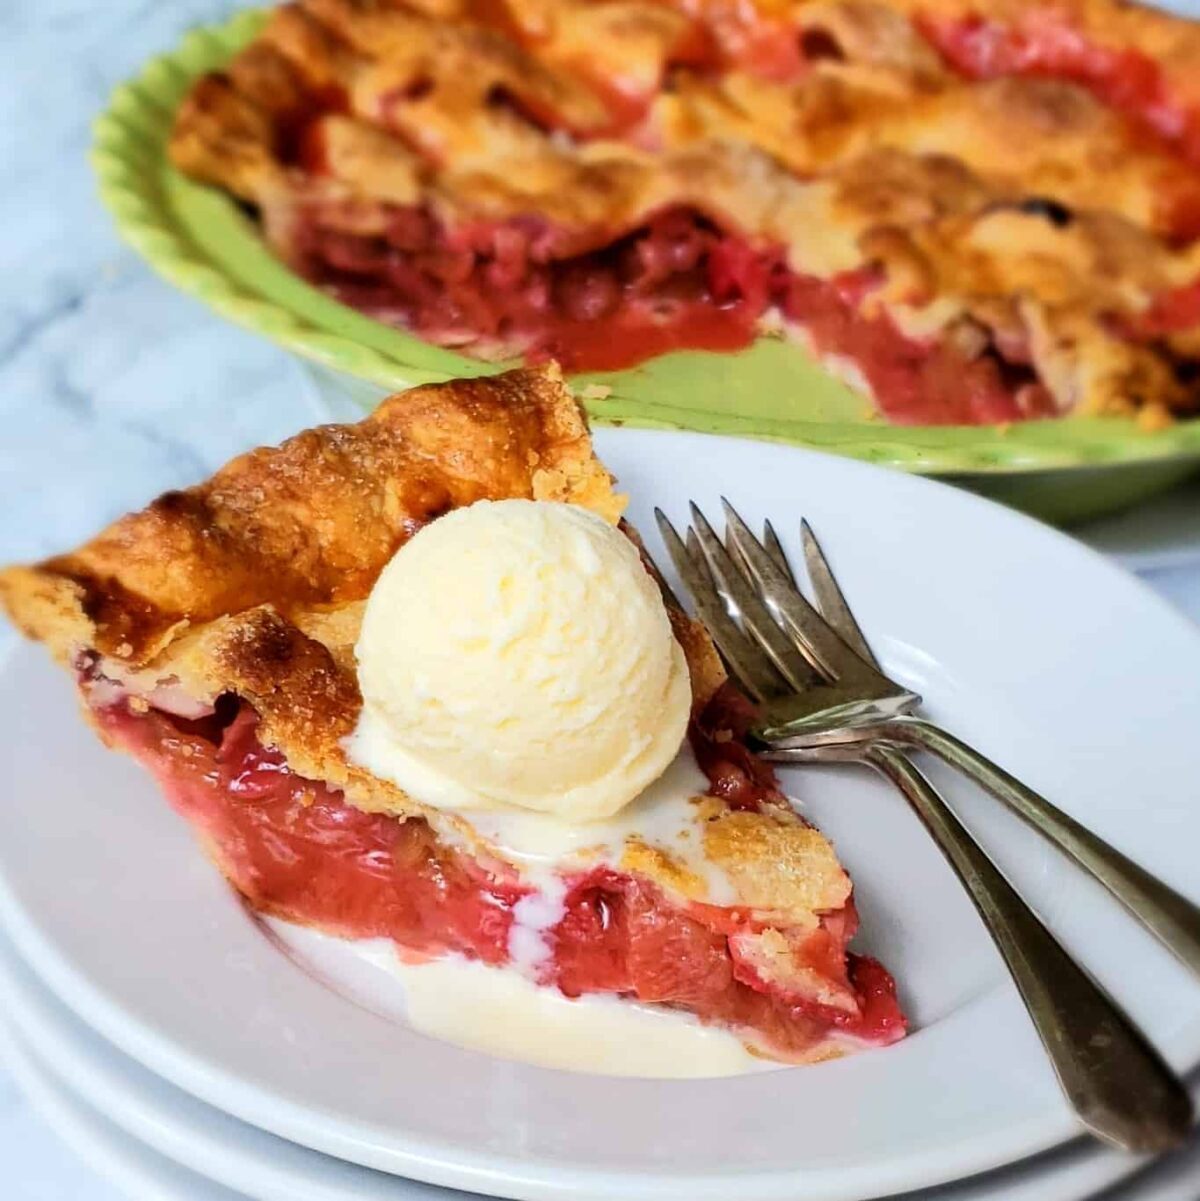  Strawberry Rhubarb Pie with scoop of vanilla ice cream on a stack of white plates and two forks.